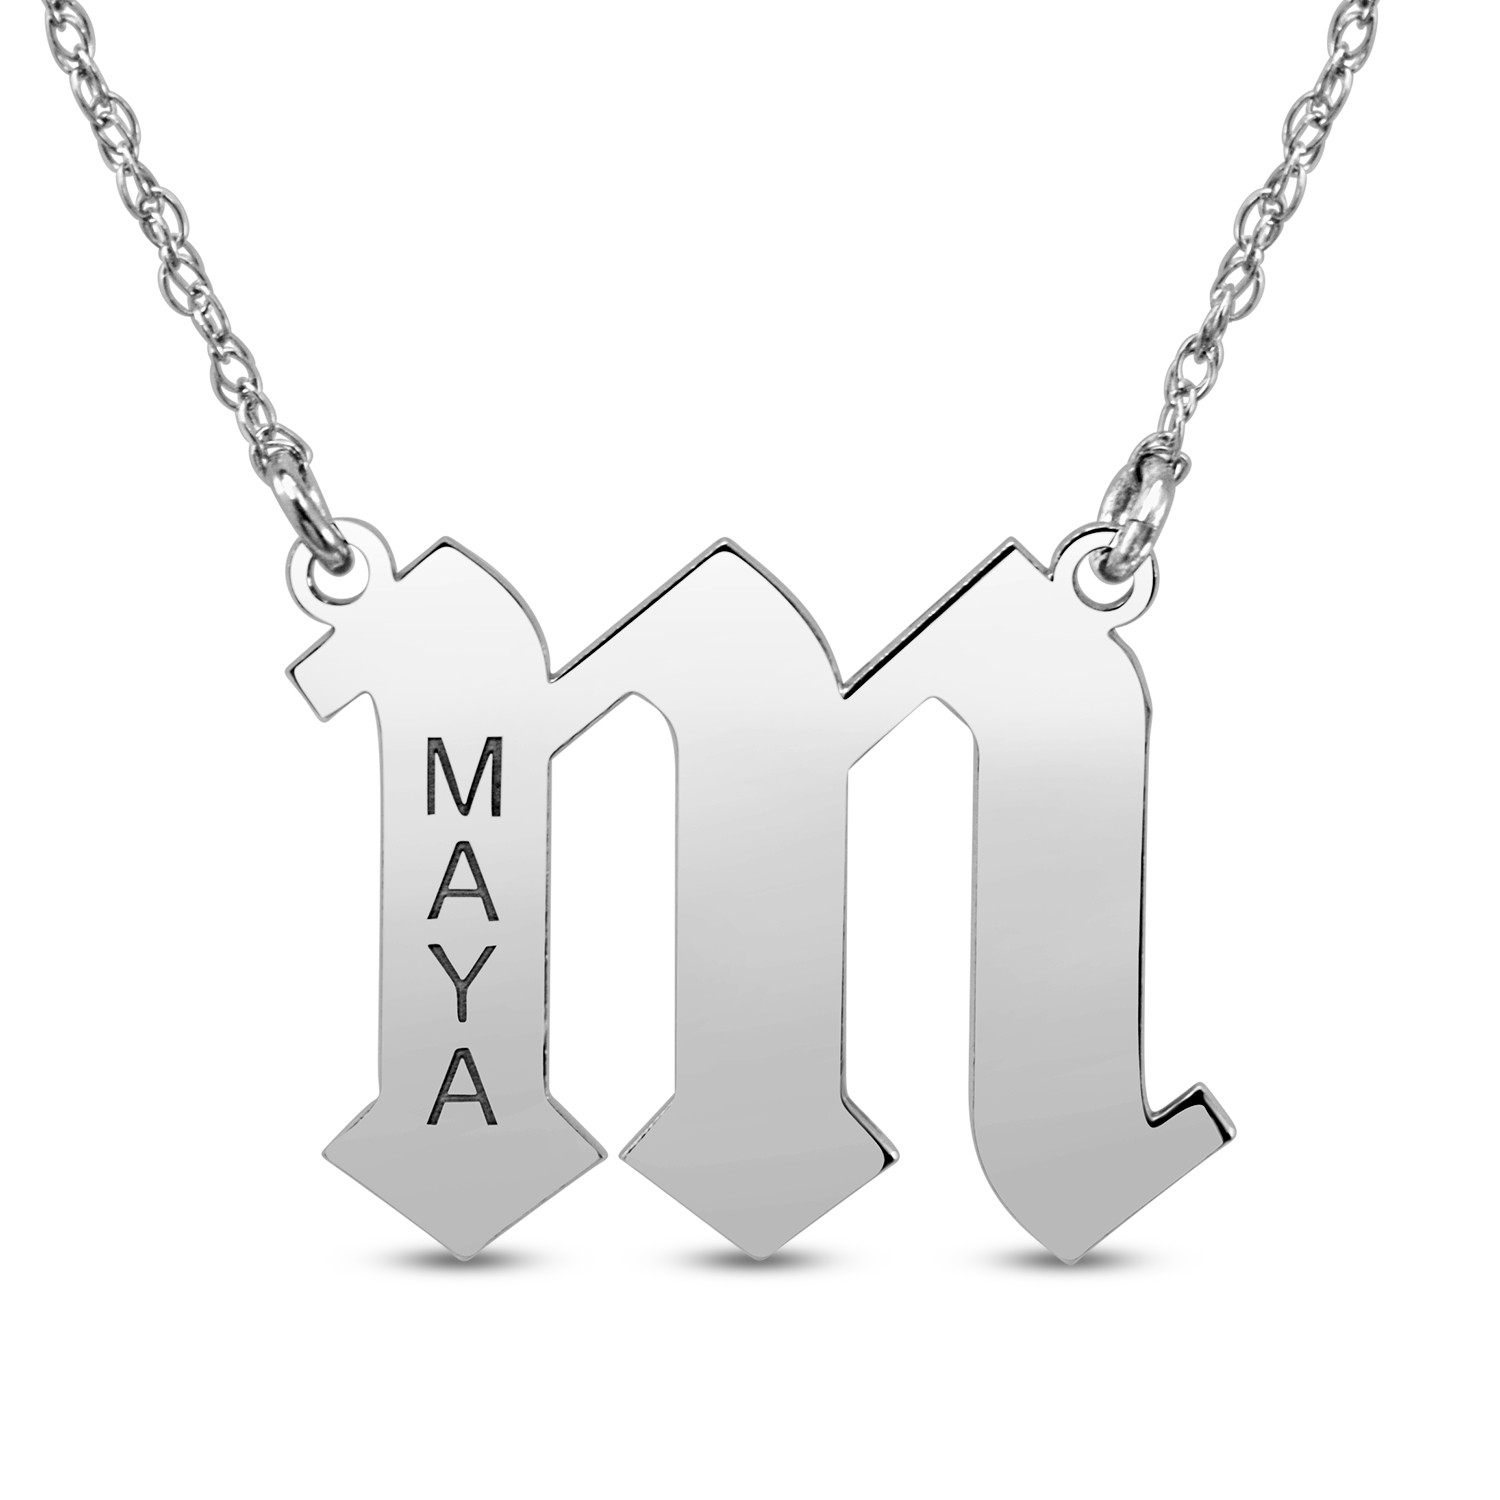 HI Polish Name Pers Necklace - 1 initial, 1 all UPPERCASE 9 letter max engraving (Example: m, MAYA 17.48mm x 22.77mm)